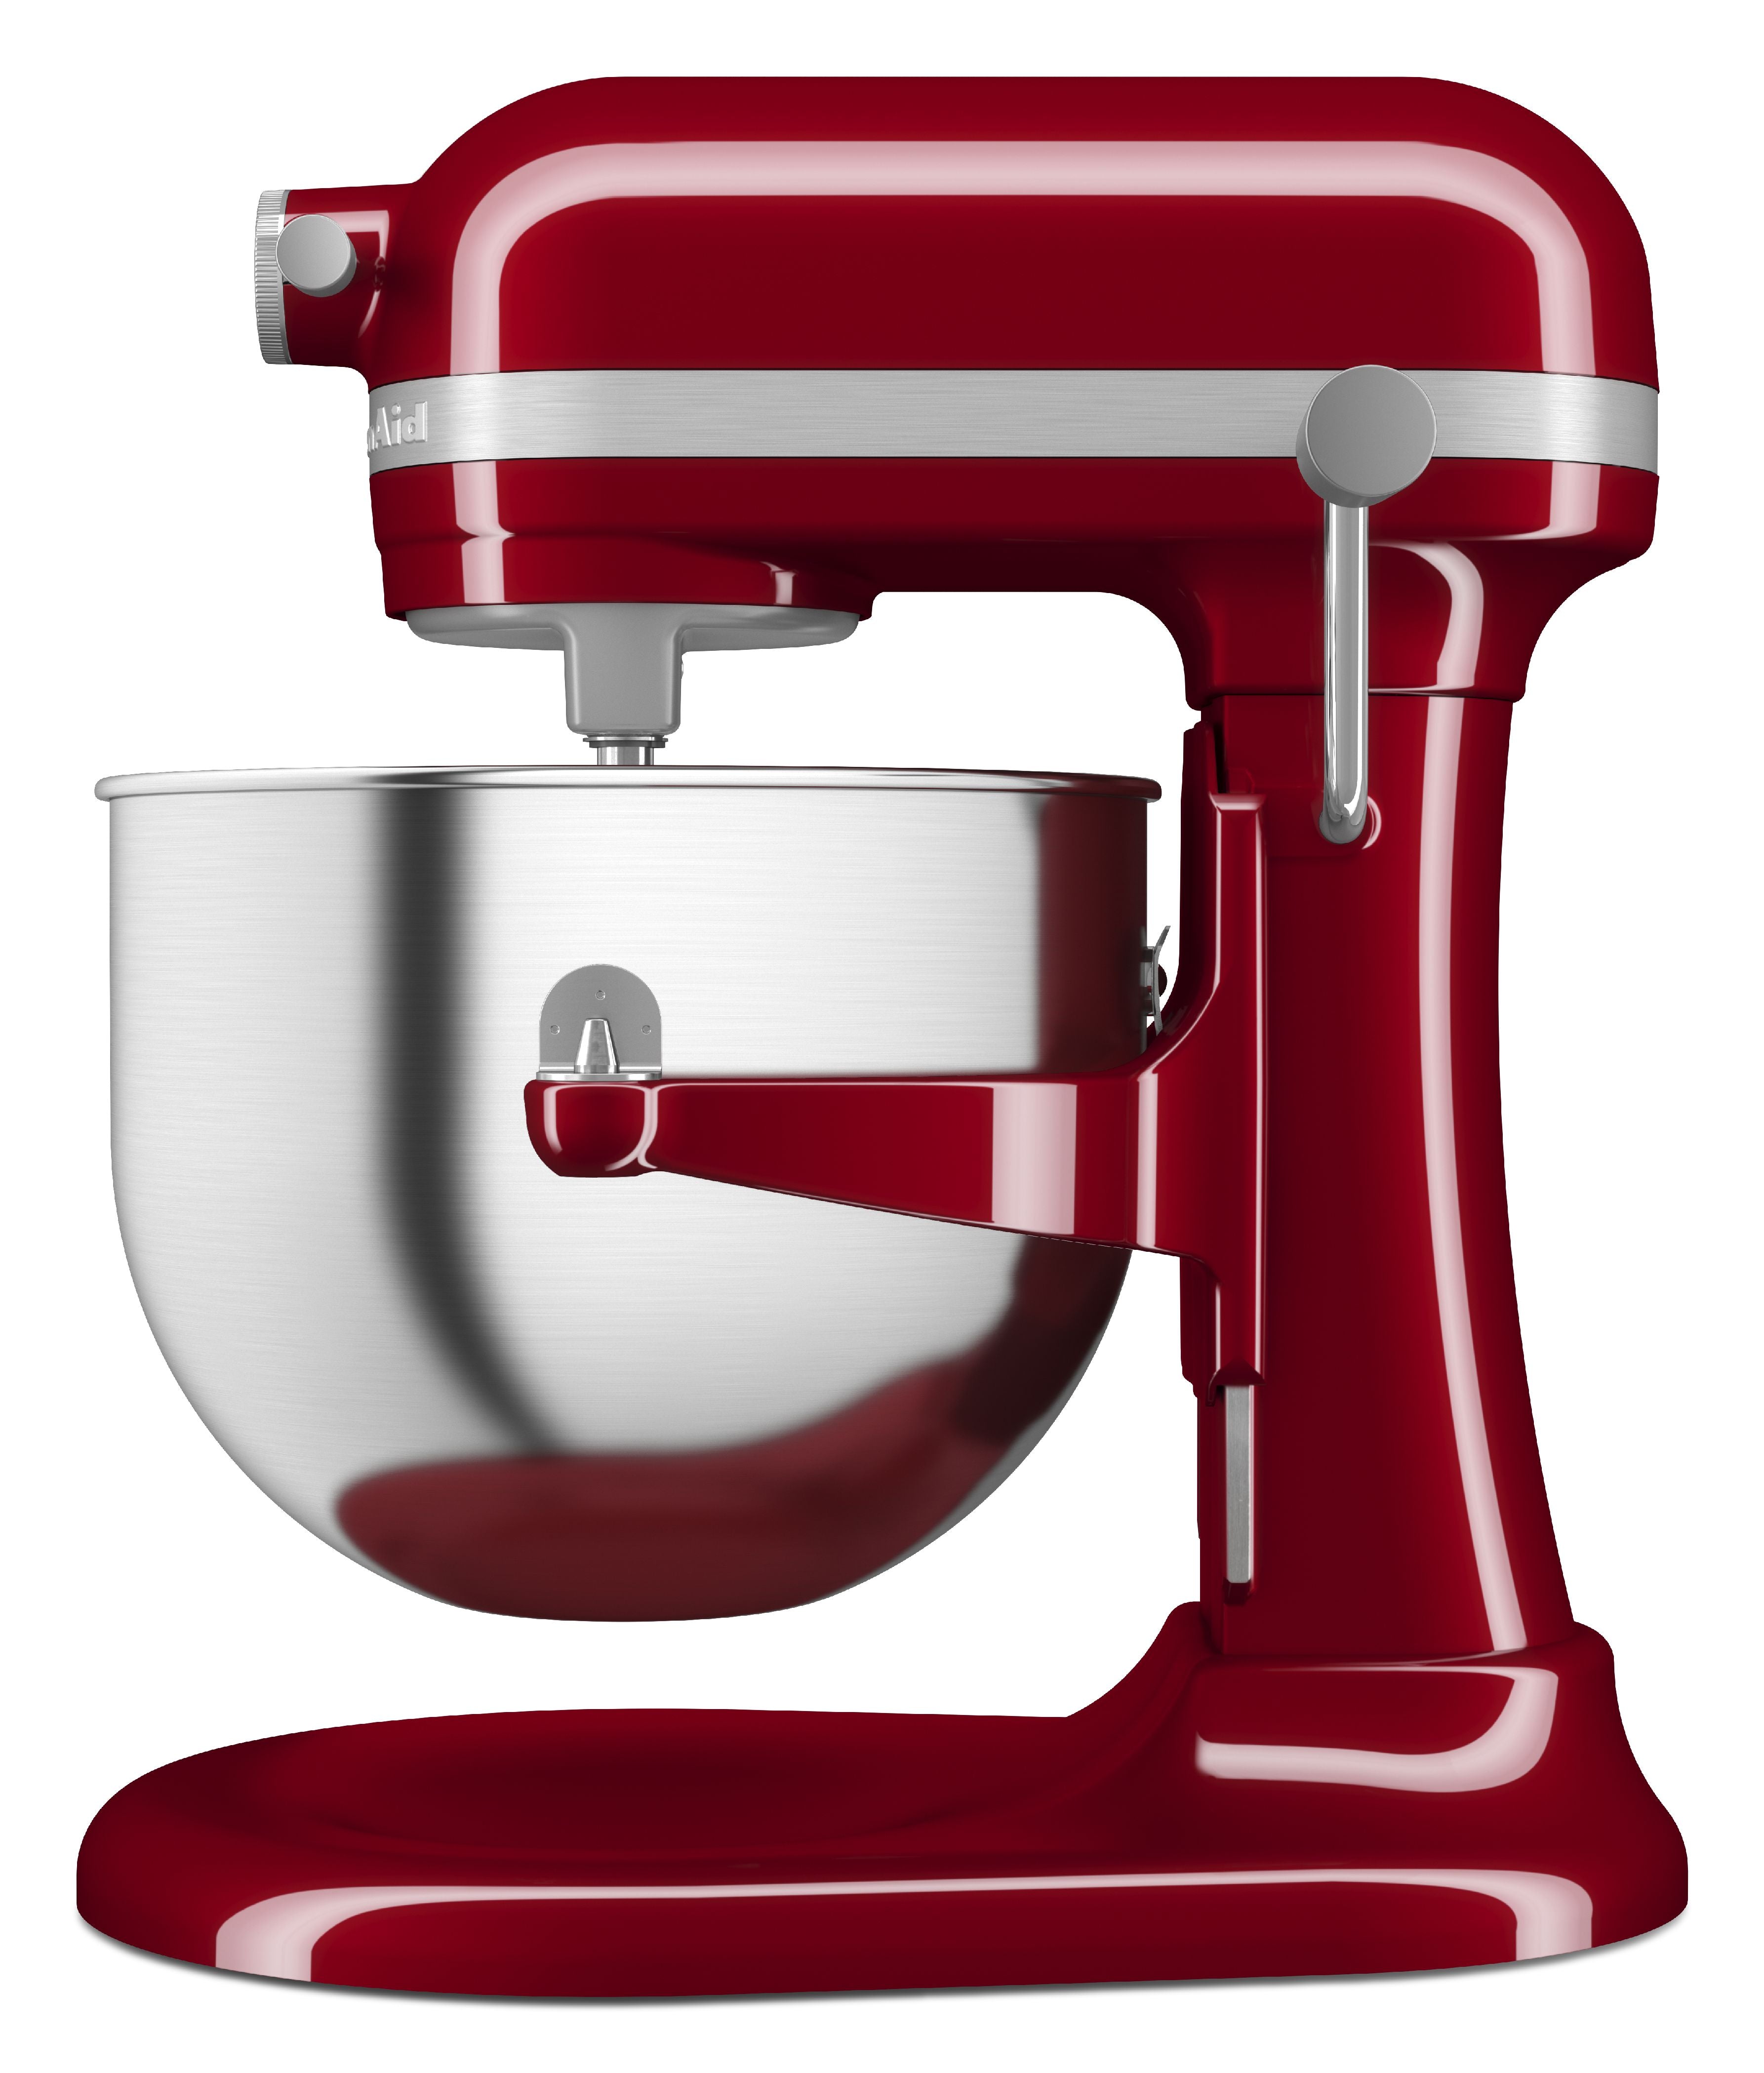 Kitchen Aid Heavy Duty Bowl Lift Stand Mixer 6.6 L, Empired Red